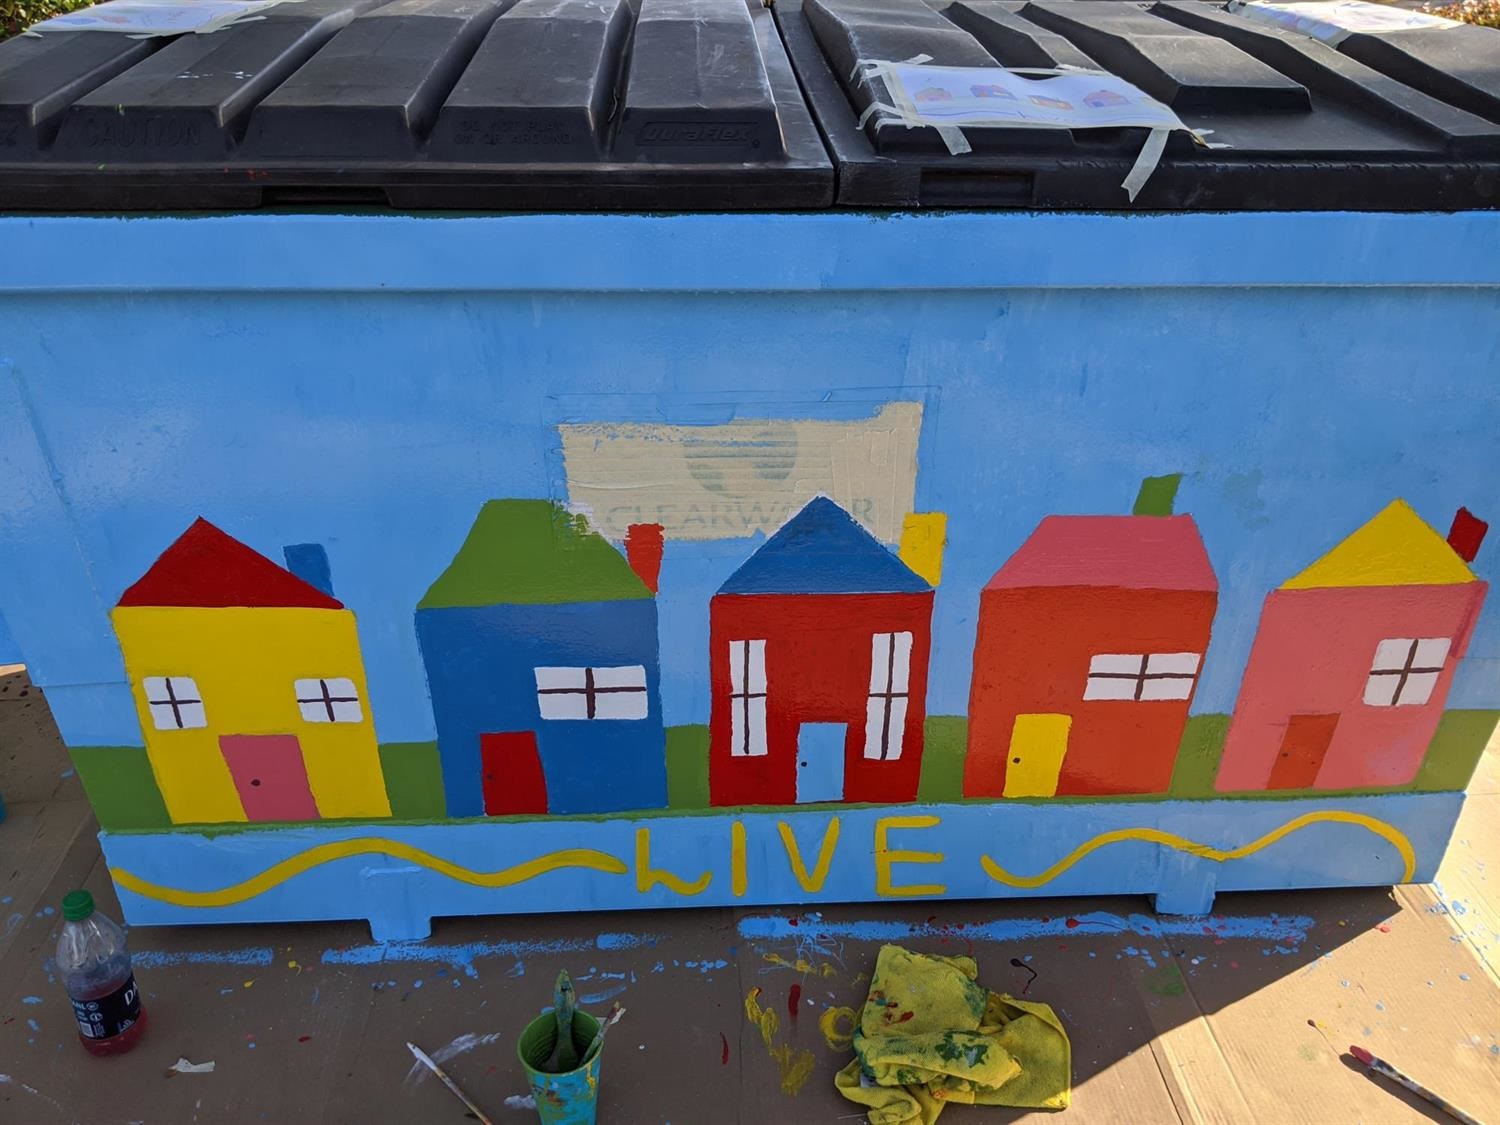 almost complete dumpster art